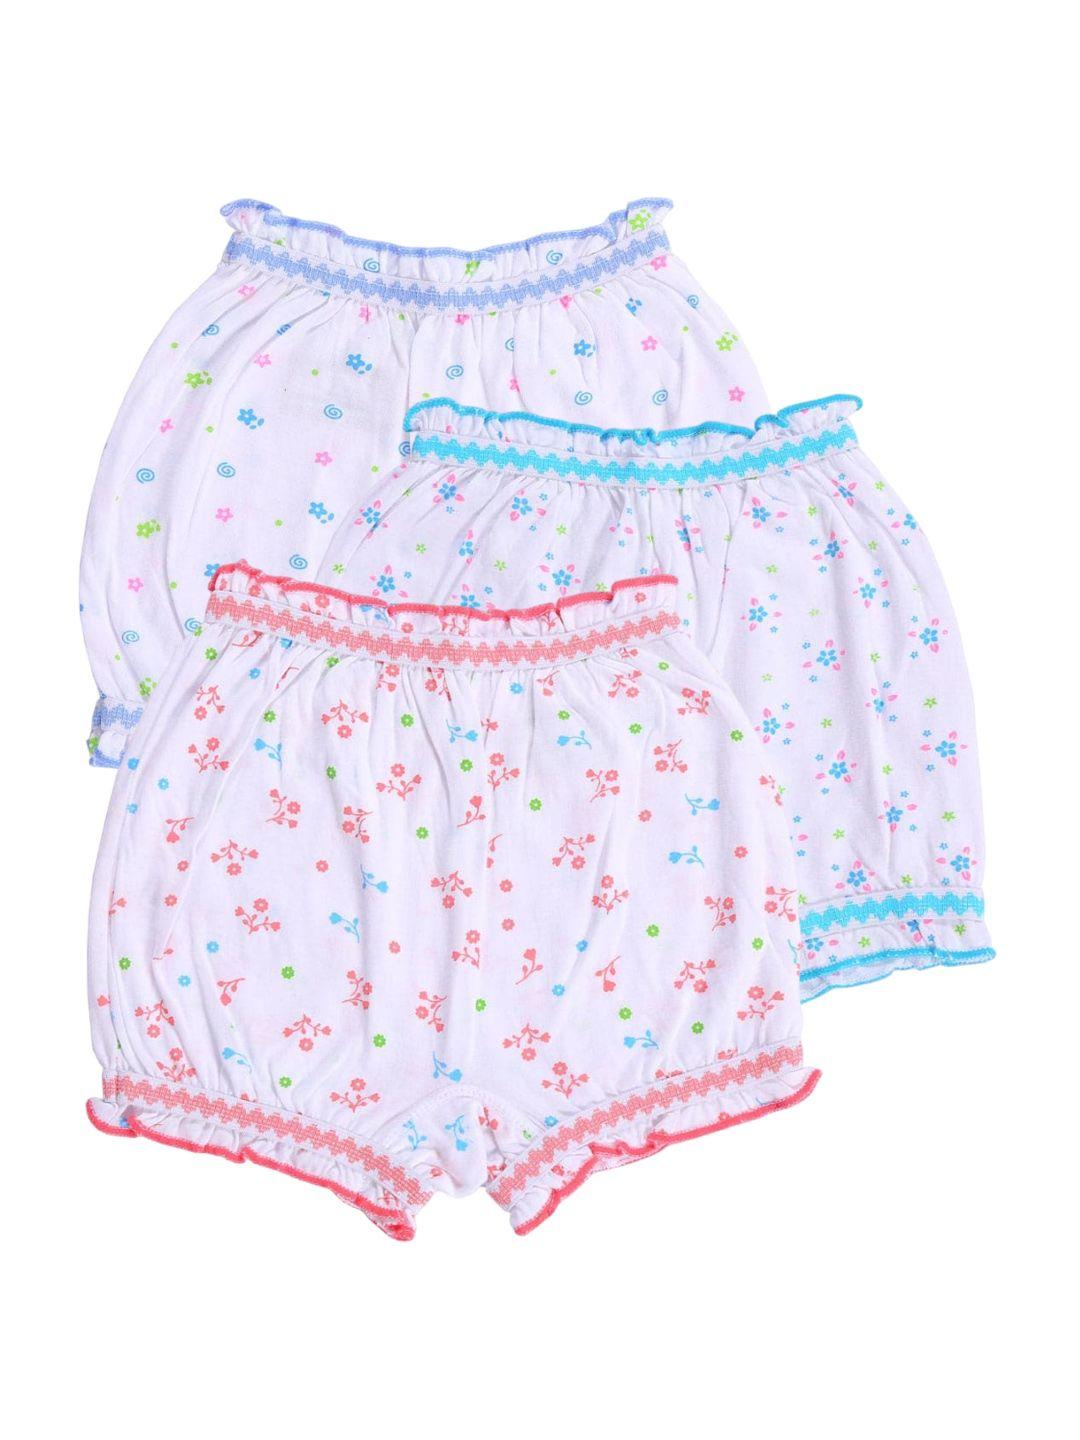 bodycare kids pack of 3 assorted floral printed pure cotton mid rise boy shorts briefs